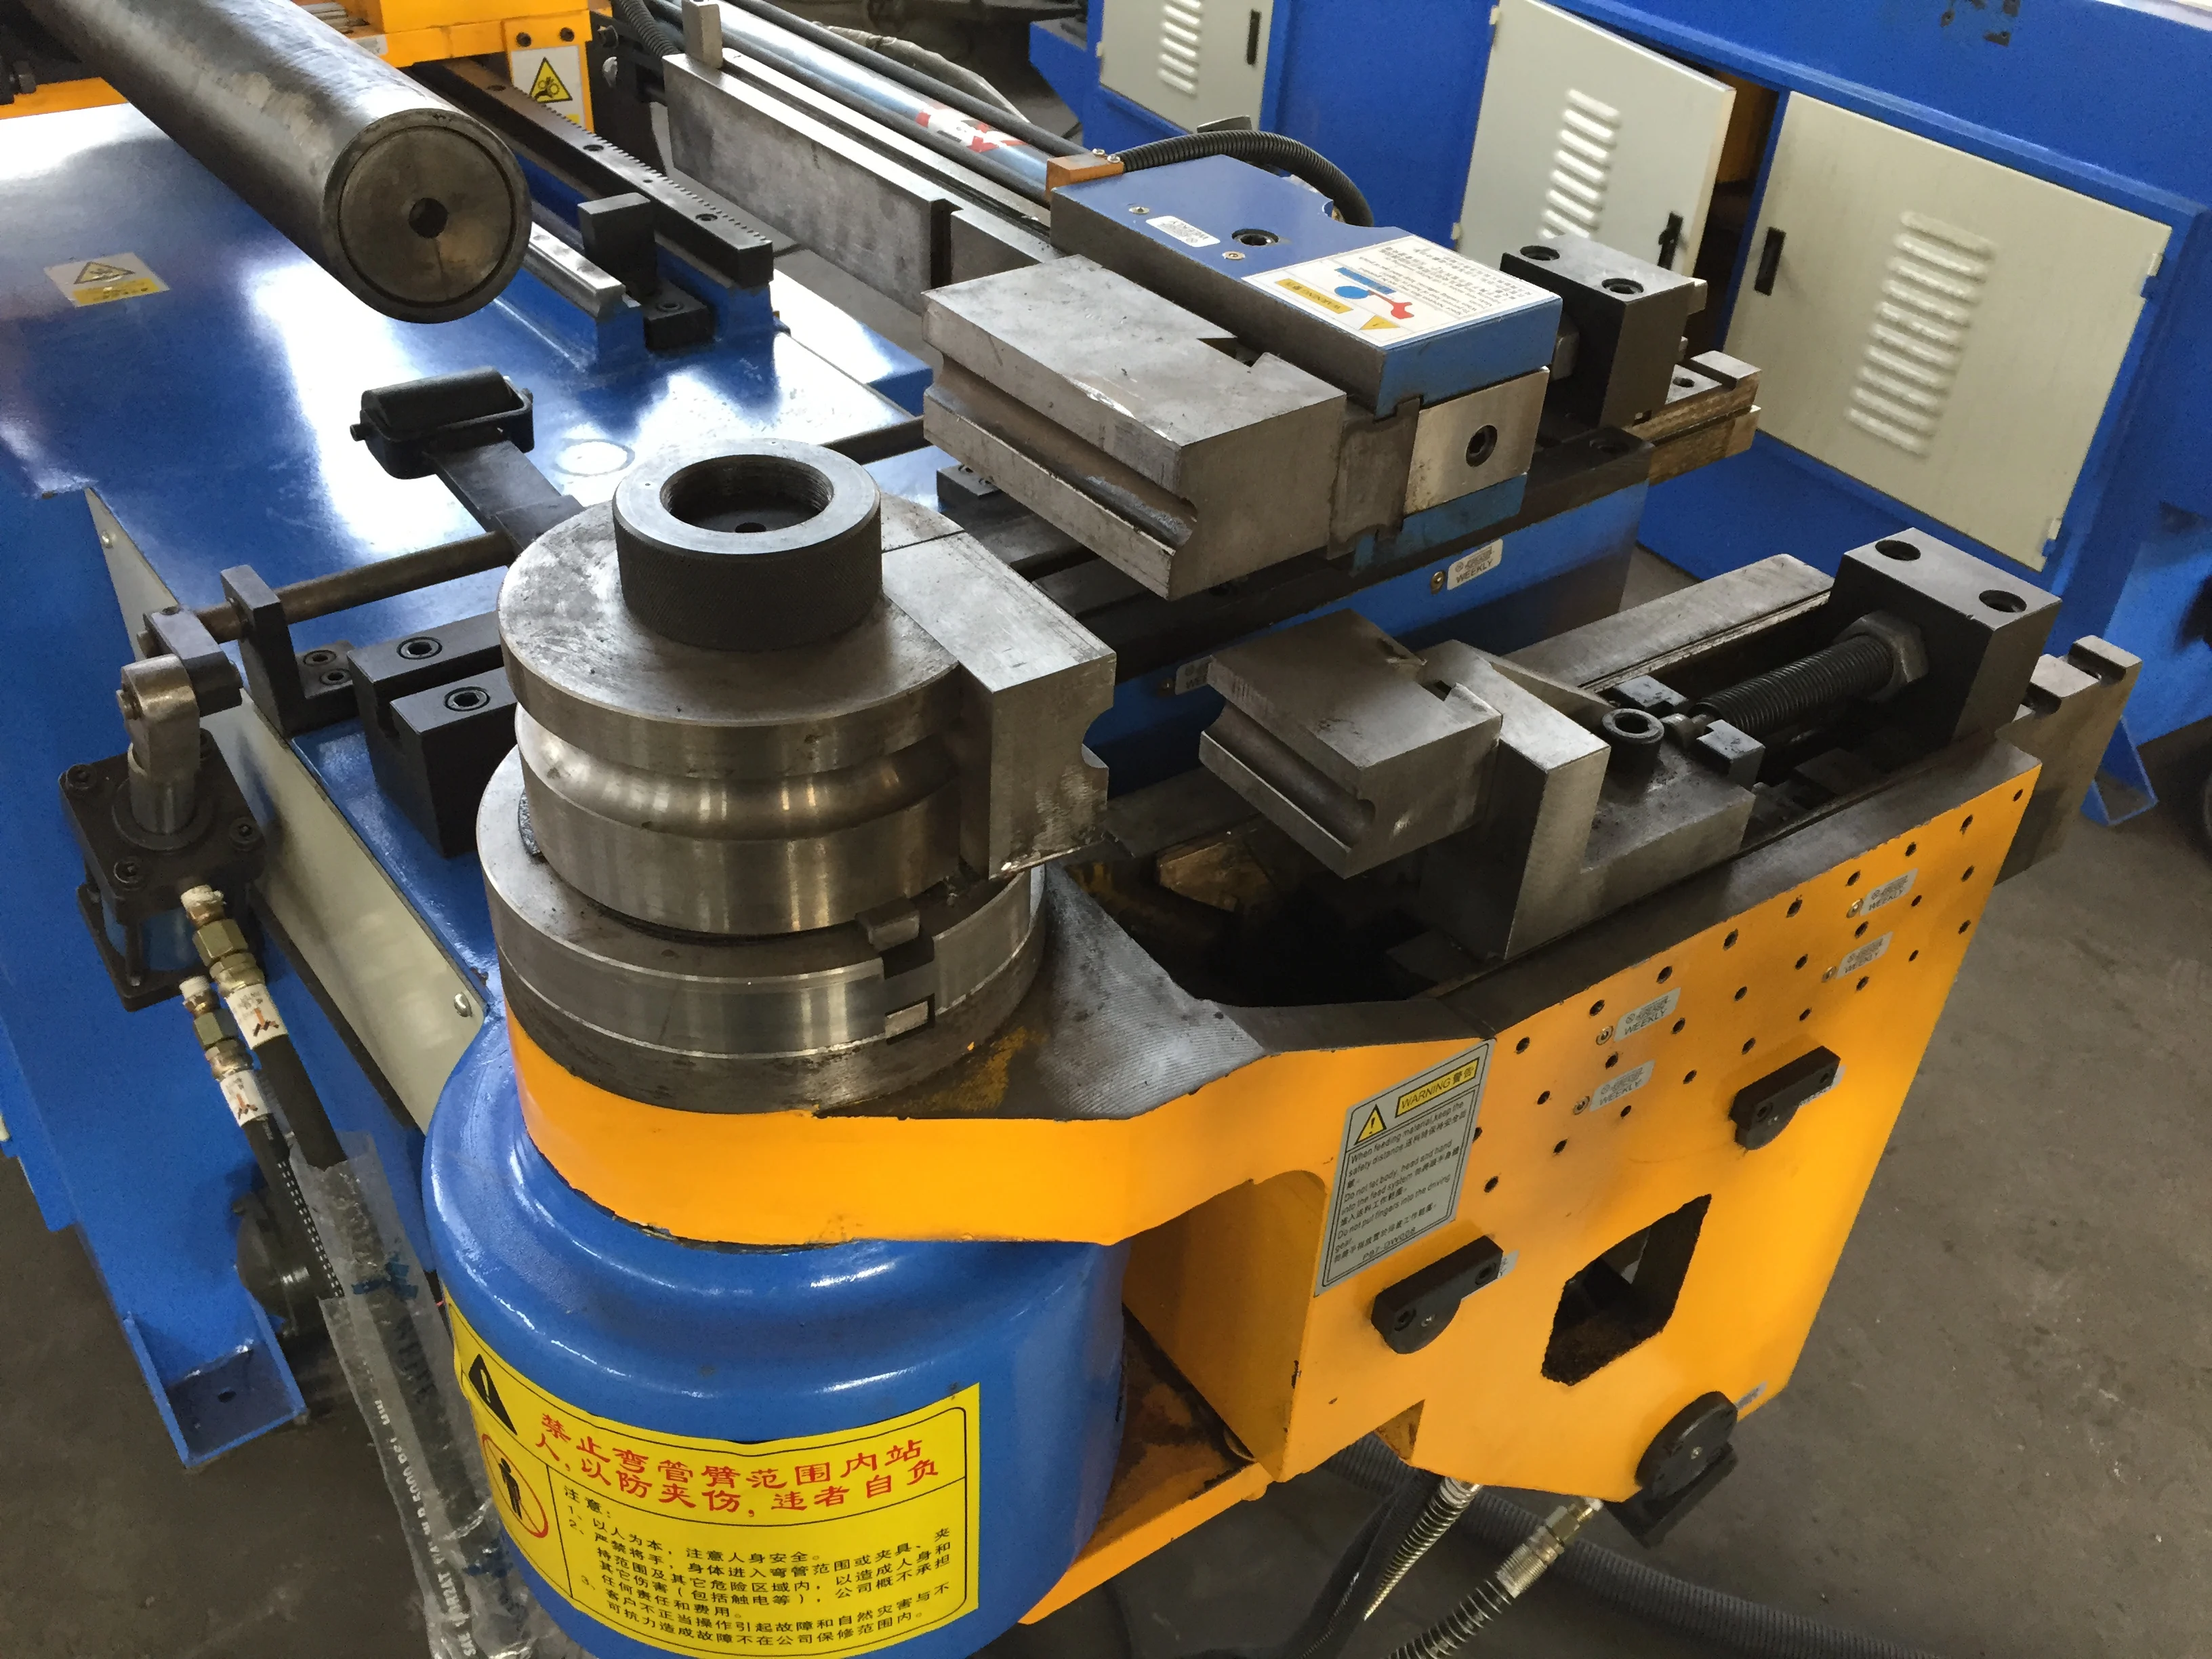 Powerful hydraulic tube clamping for improved bending quality for metal tube bending Accurl 50NC tube bending machine